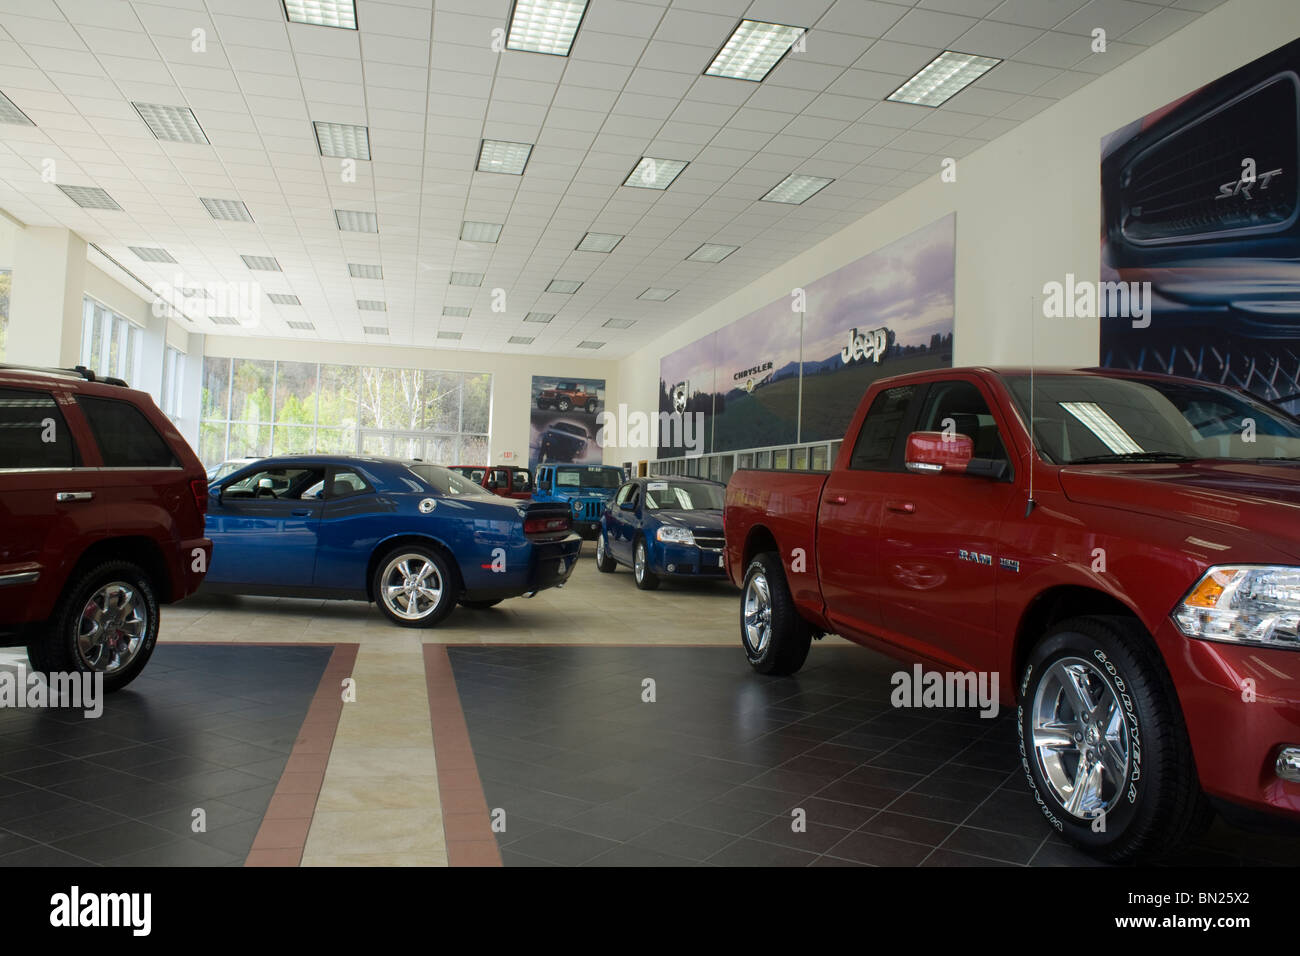 Massachusetts car dealer is selling Chevrolet and Dodge automobiles. Stock Photo